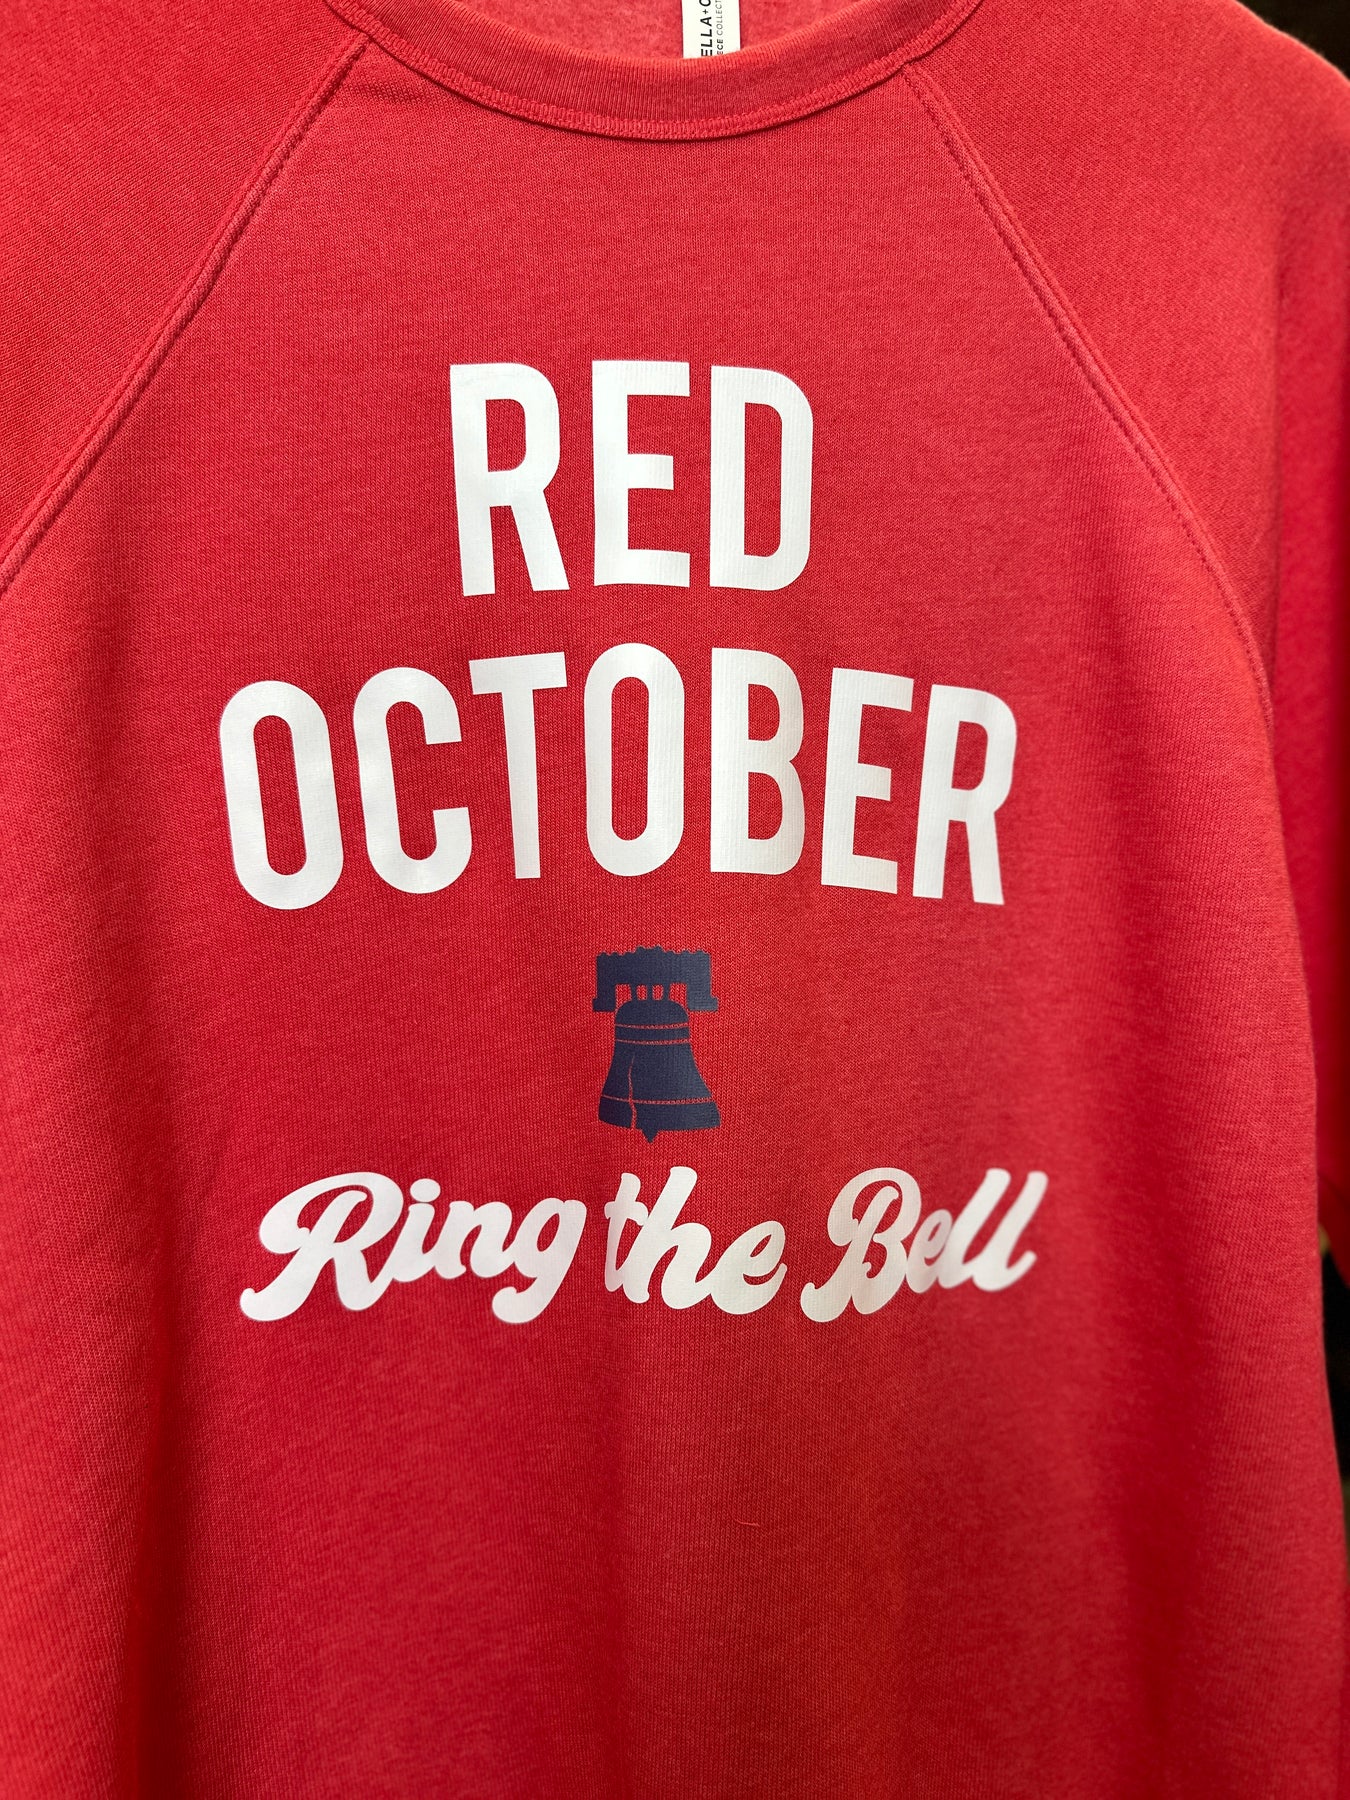 Red October/ Ring The Bell Crew